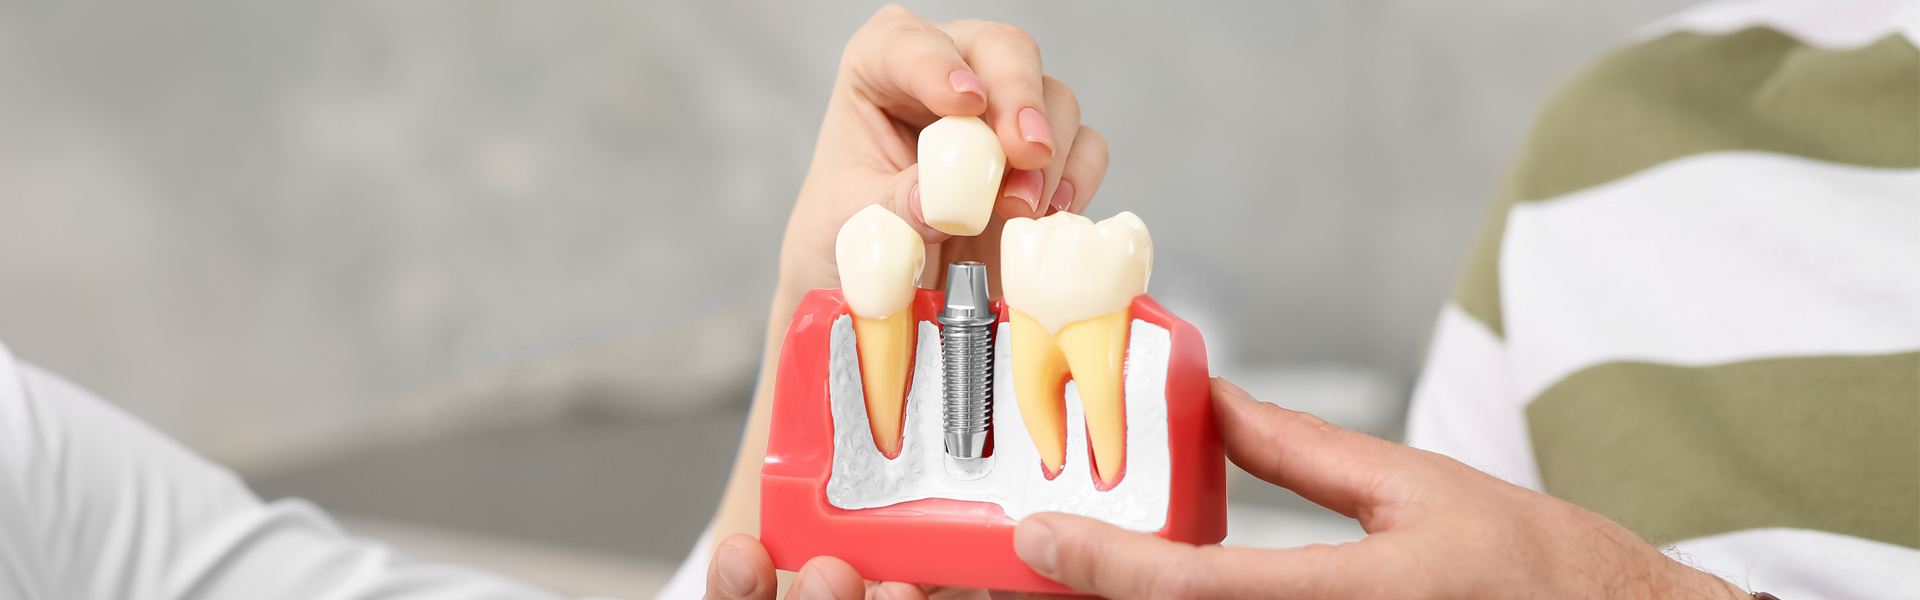 Temporary Dental Implants: A Great Option For Patients Who Do Not Want To Wear A Removable Denture appliance